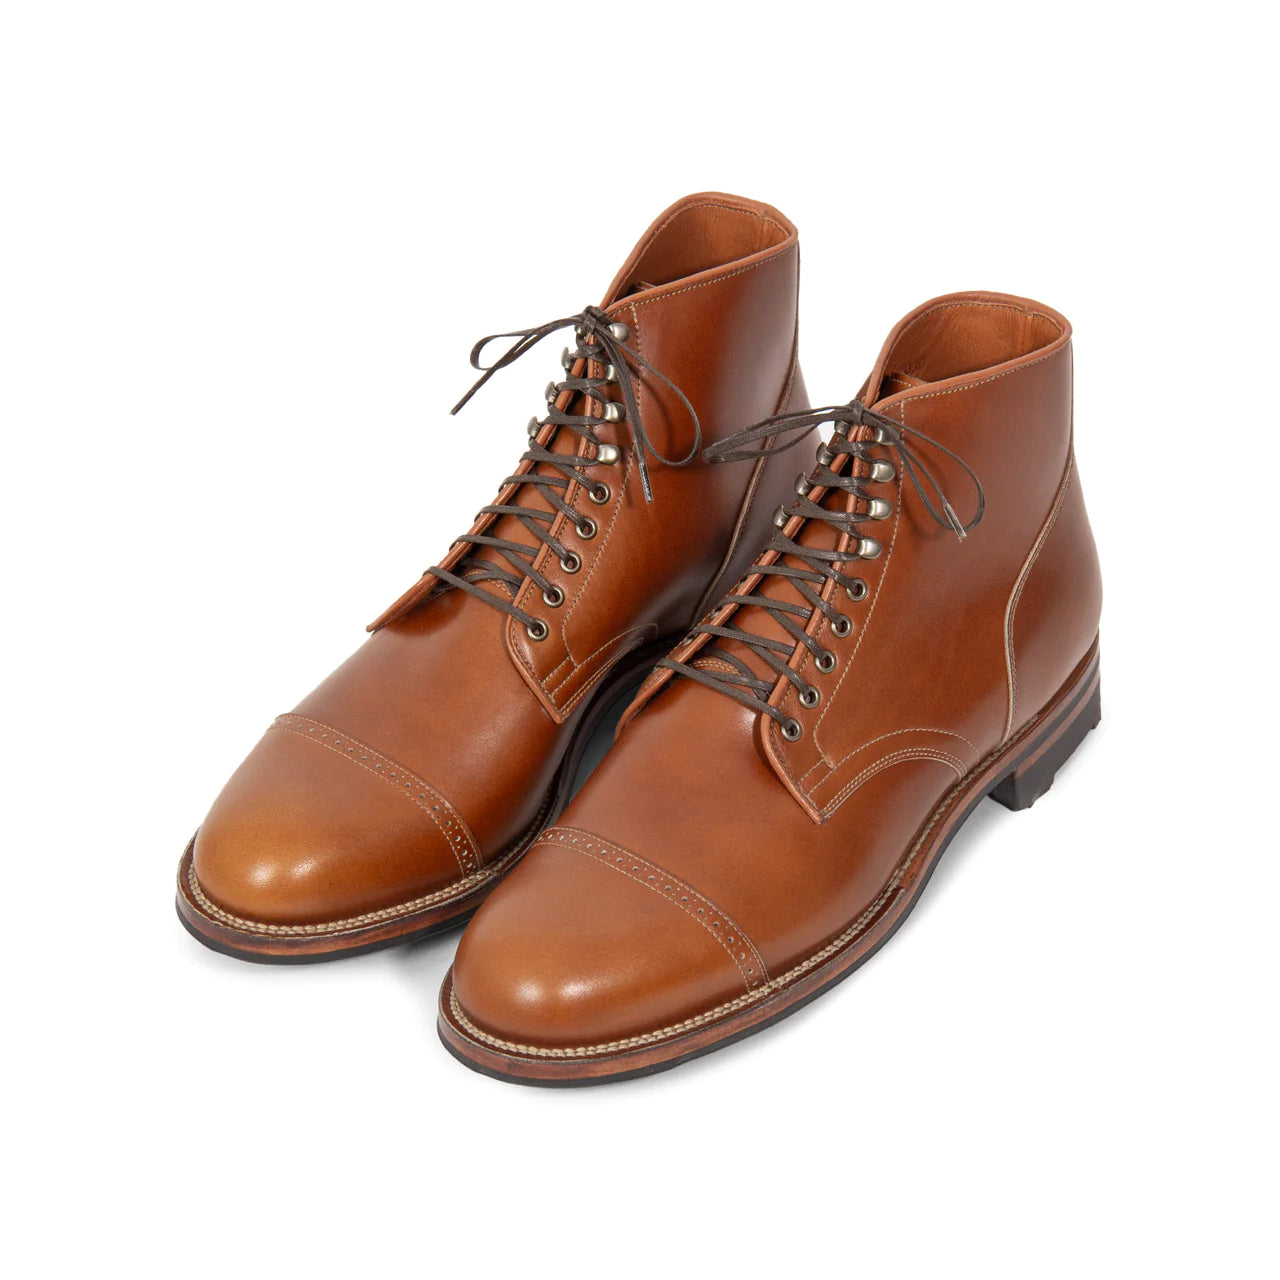 Viberg Service Boot 2030 - Annonay Tan French Vocalou